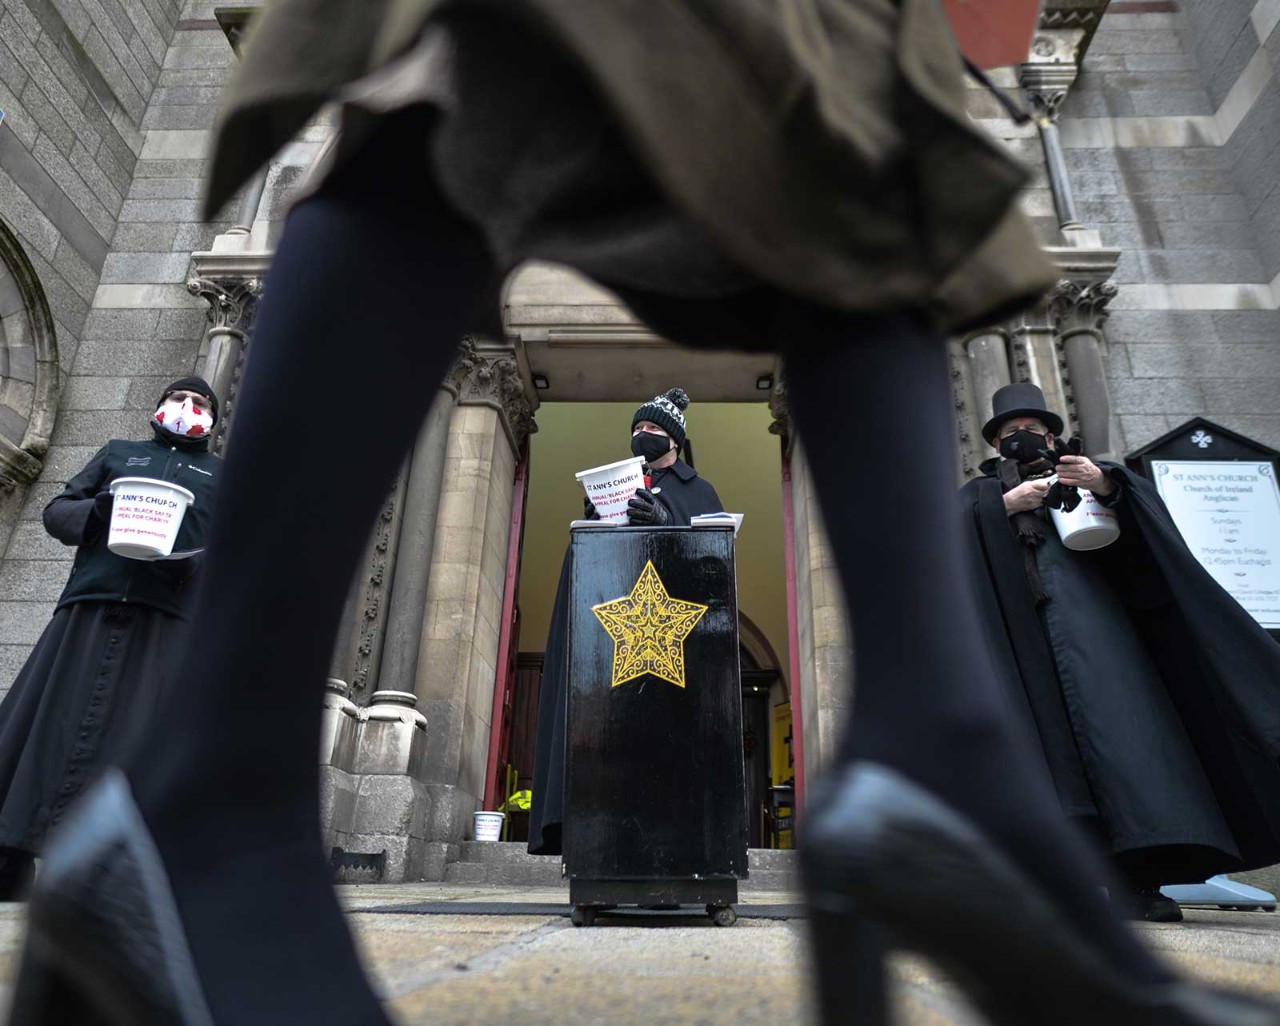 The €40,000 raised each year by the Black Santa charity sit-out appeal at St Ann's Church in Dublin is just a small part of the non-profit sector’s €14.2bn turnover, but most Irish charities do not file charity-specific SORP accounts 